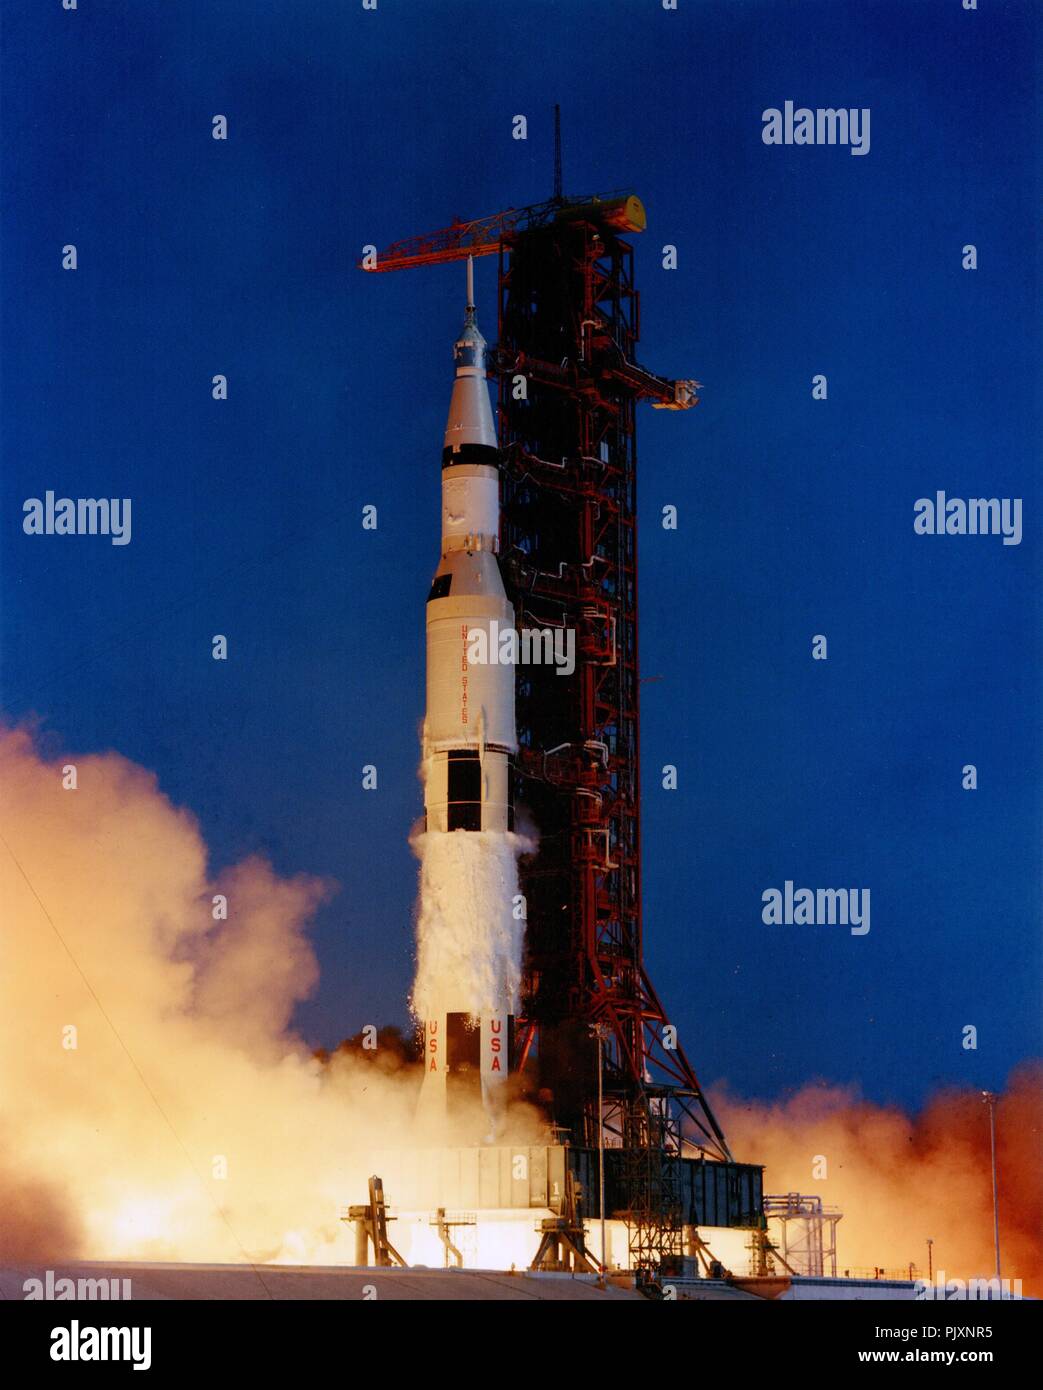 Cape Canaveral, FL - (FILE) -- The Apollo 11 Saturn V is pictured seconds after first-stage ignition for the launch of the first manned mission to land on the Moon on Wednesday, July 16, 1969 Credit: NASA via CNP /MediaPunch Stock Photo